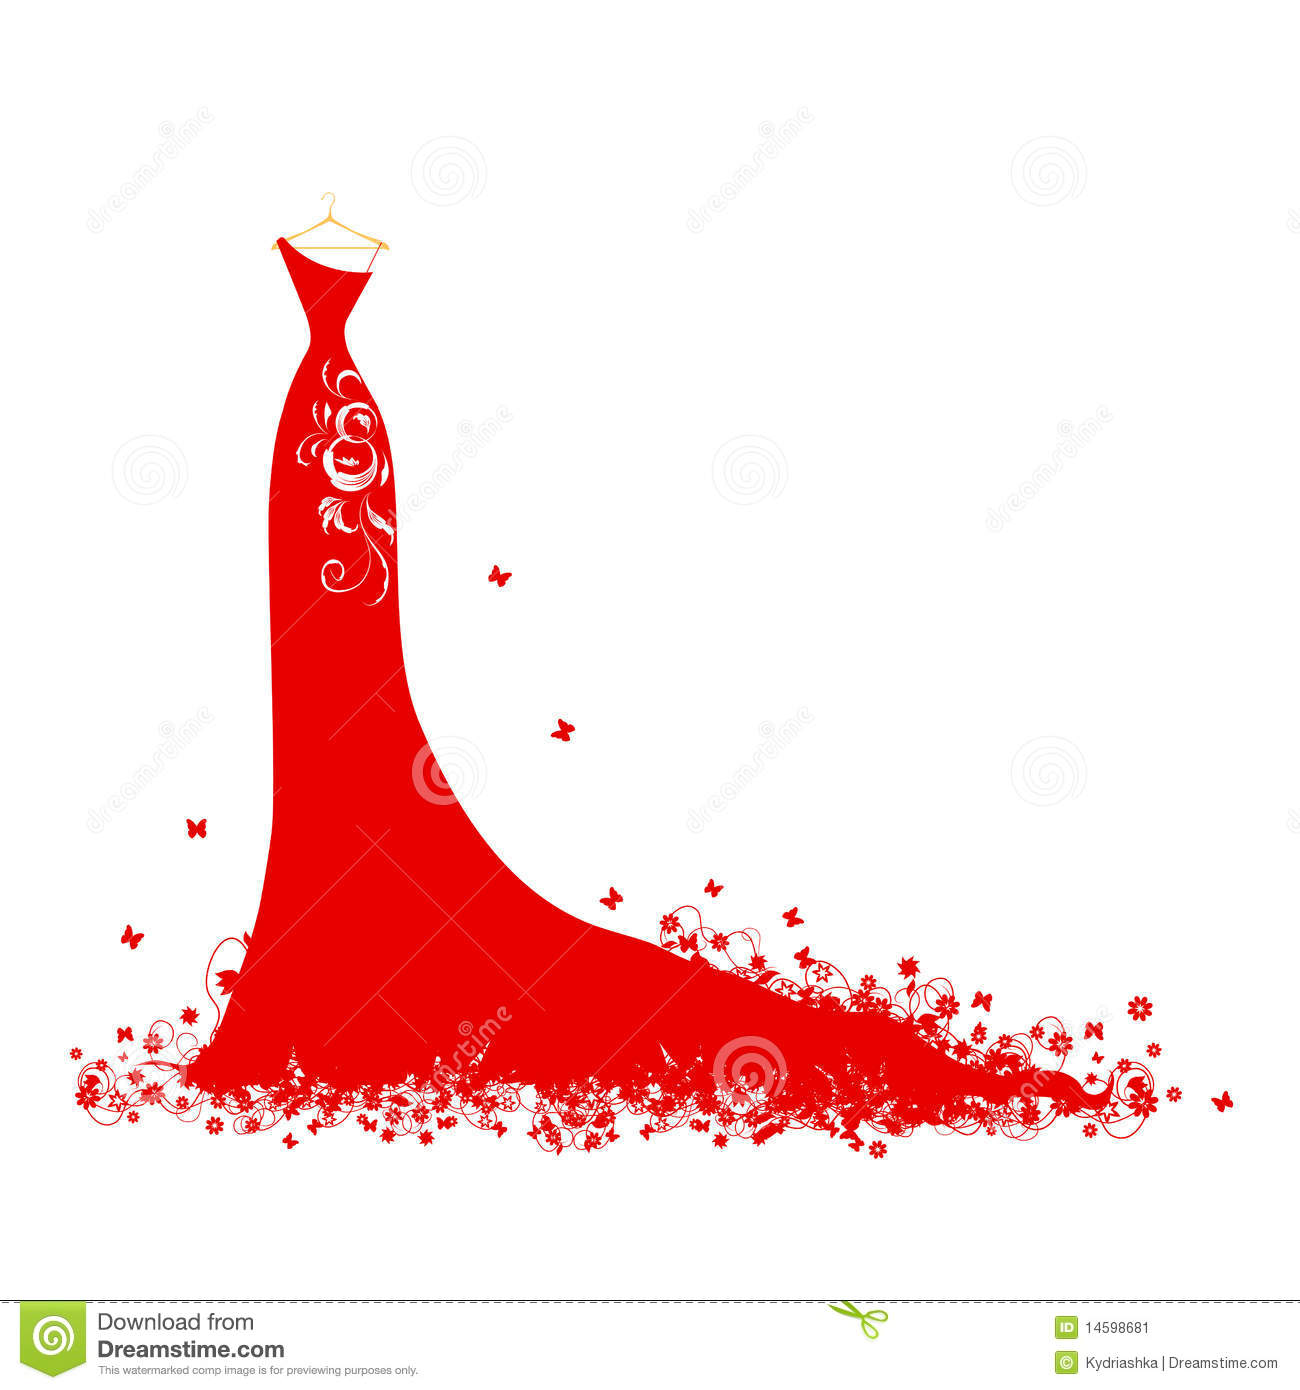 More Similar Stock Images Of   Wedding Dress Red On Hangers